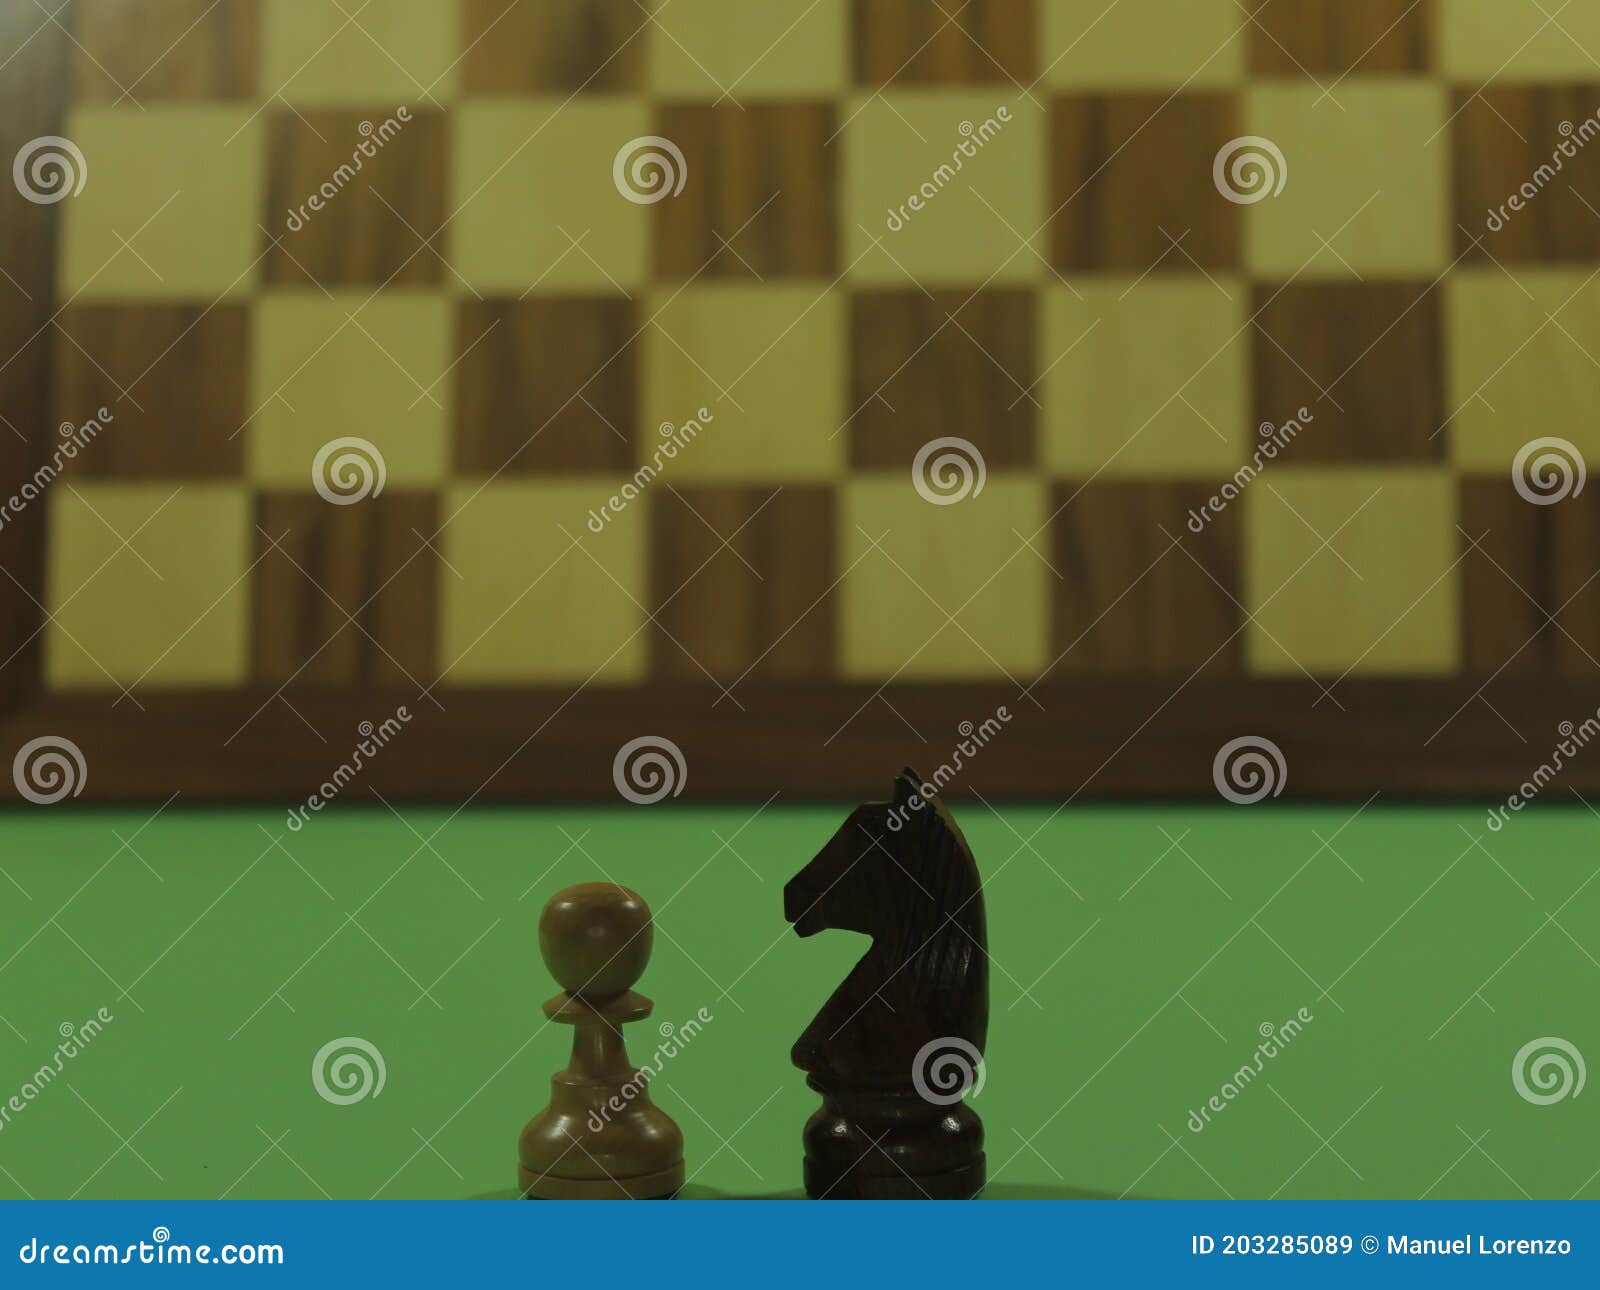 figures chess plays checkmate fun intelligence king horse bishop tower pawn